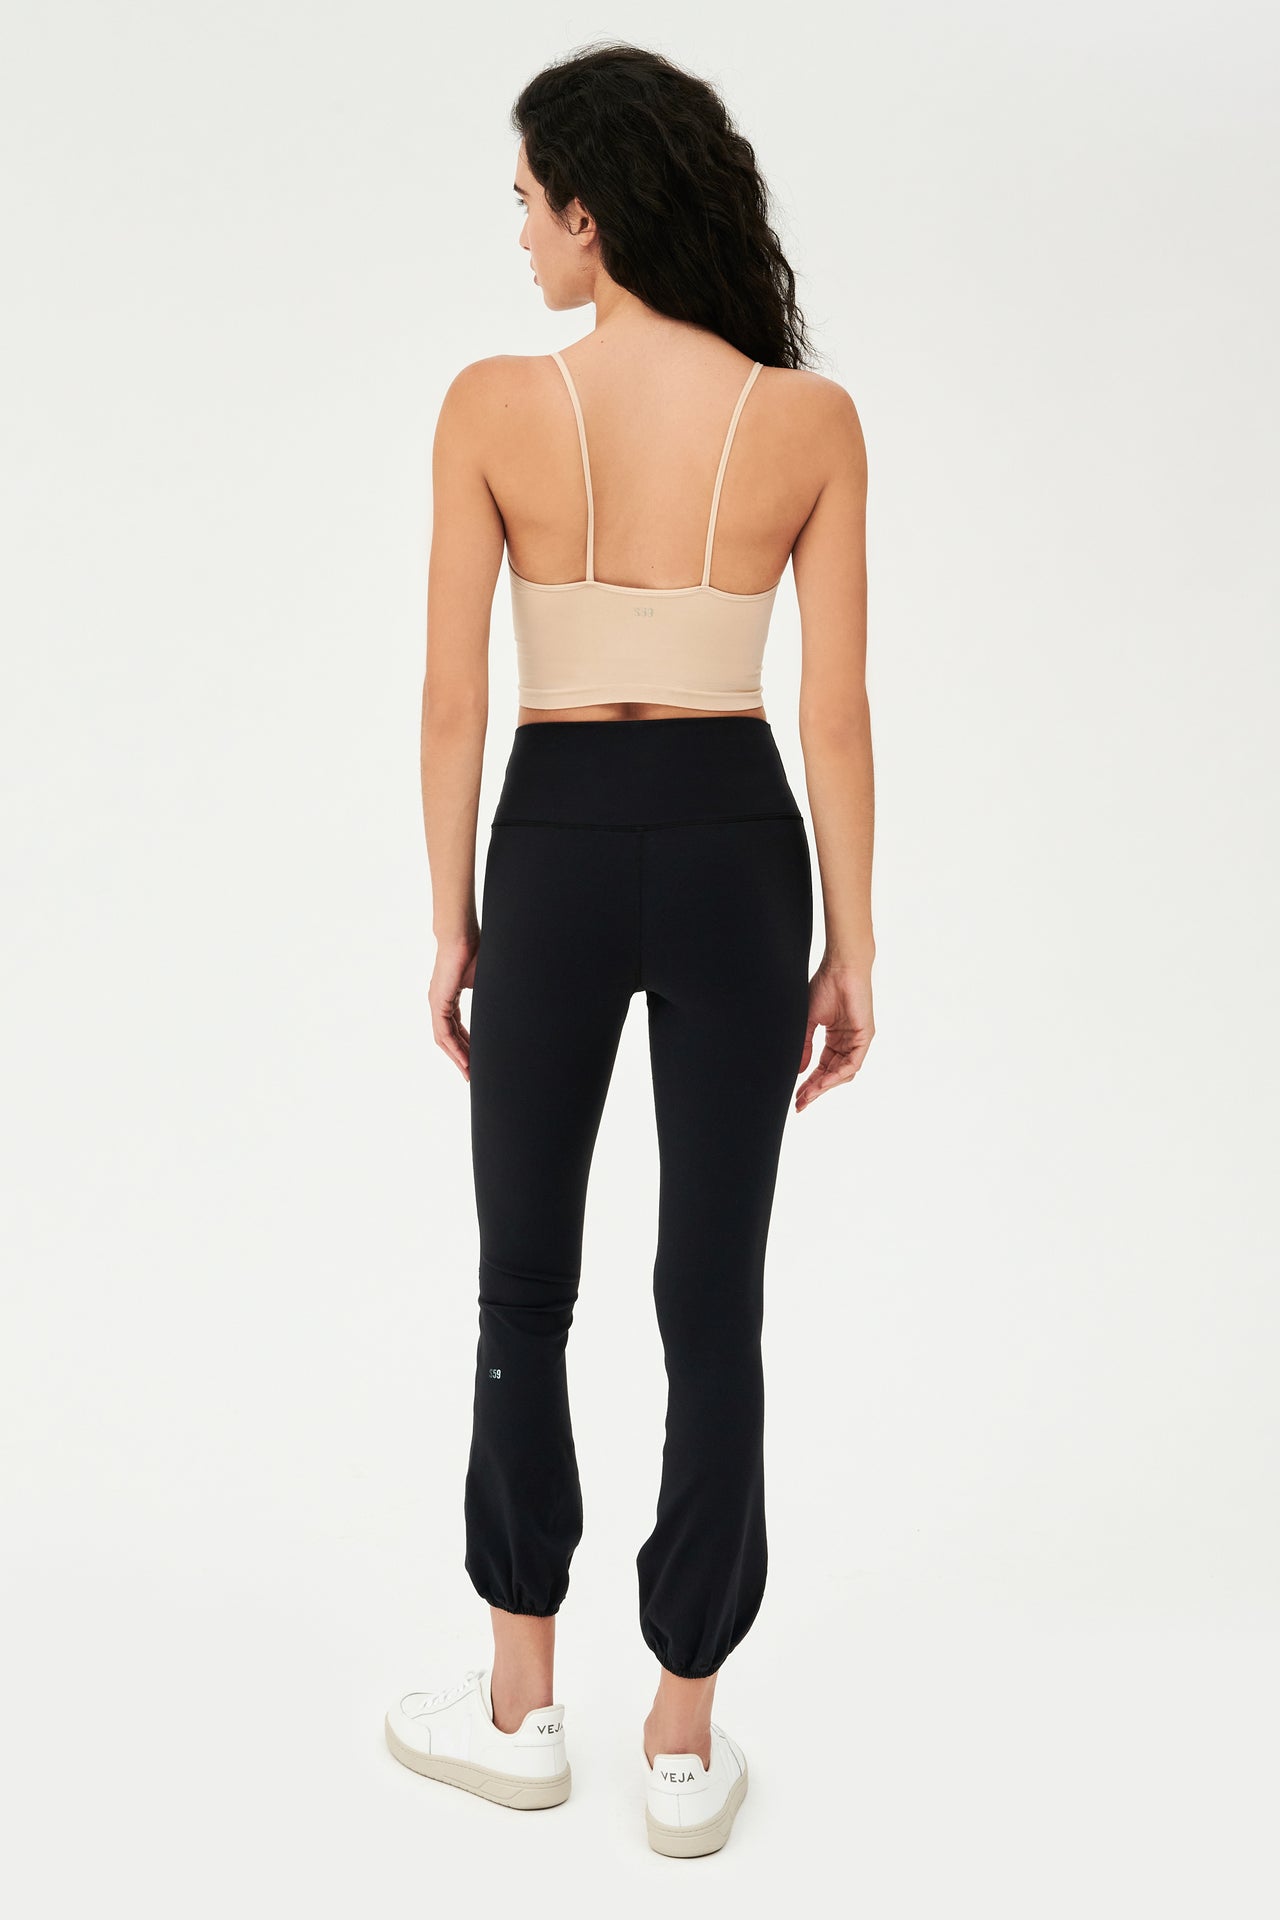 The back view of a woman wearing SPLITS59's Icon High Waist Supplex Legging in Black.